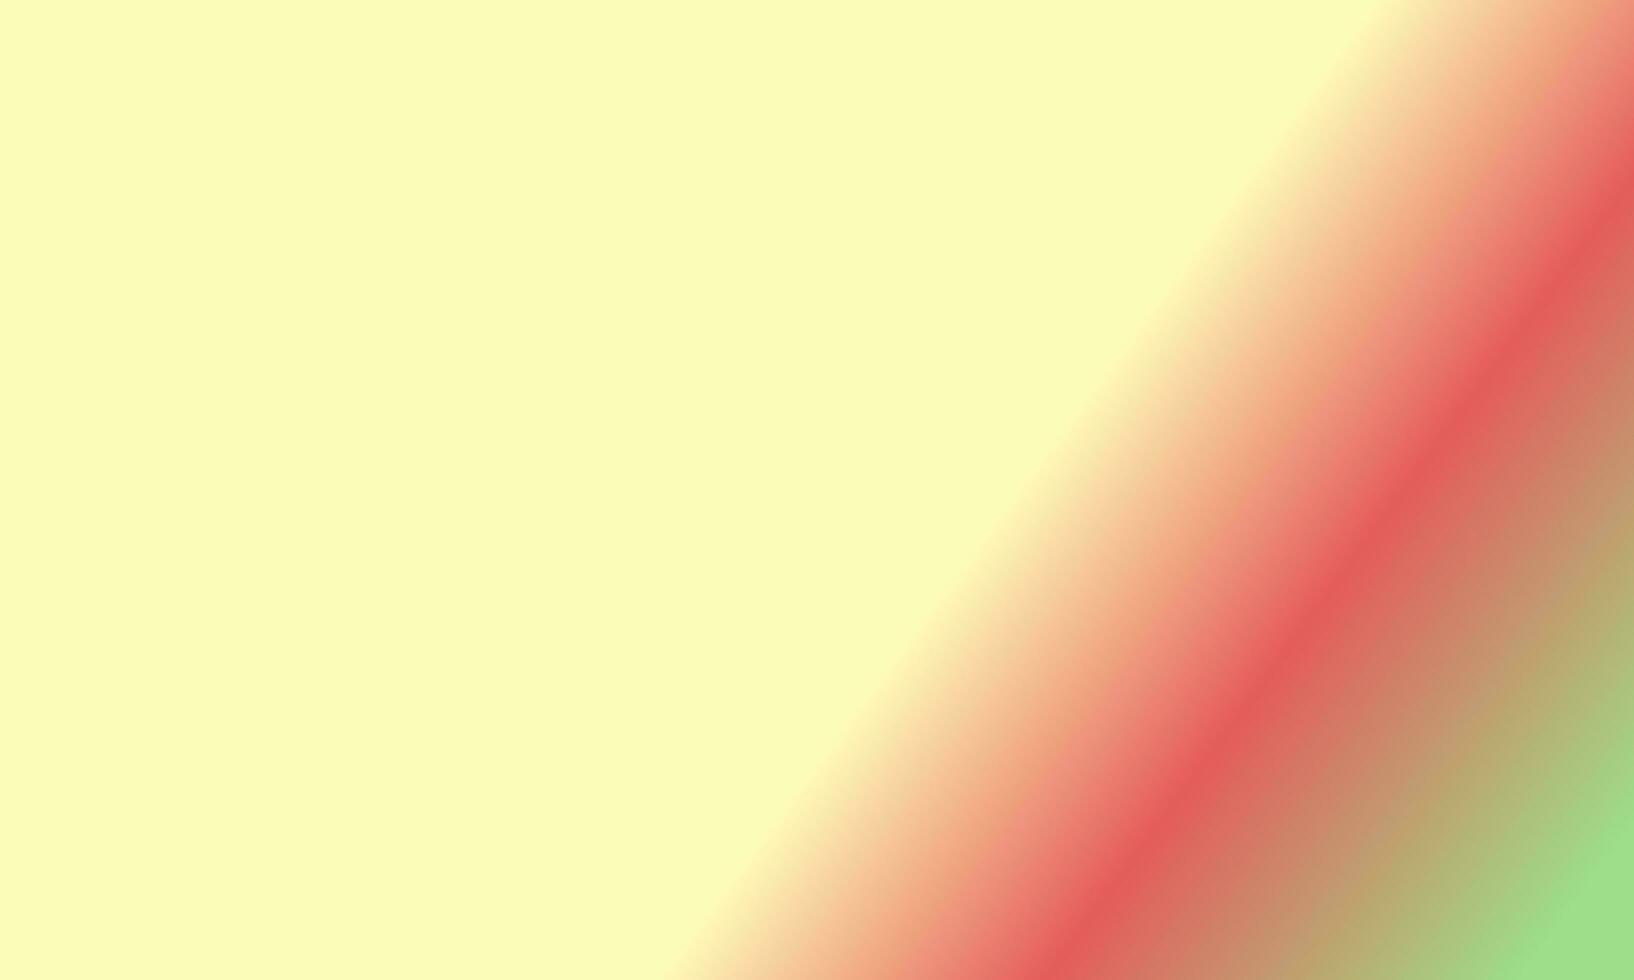 Design simple pastel yellow,red and green gradient color illustration background photo